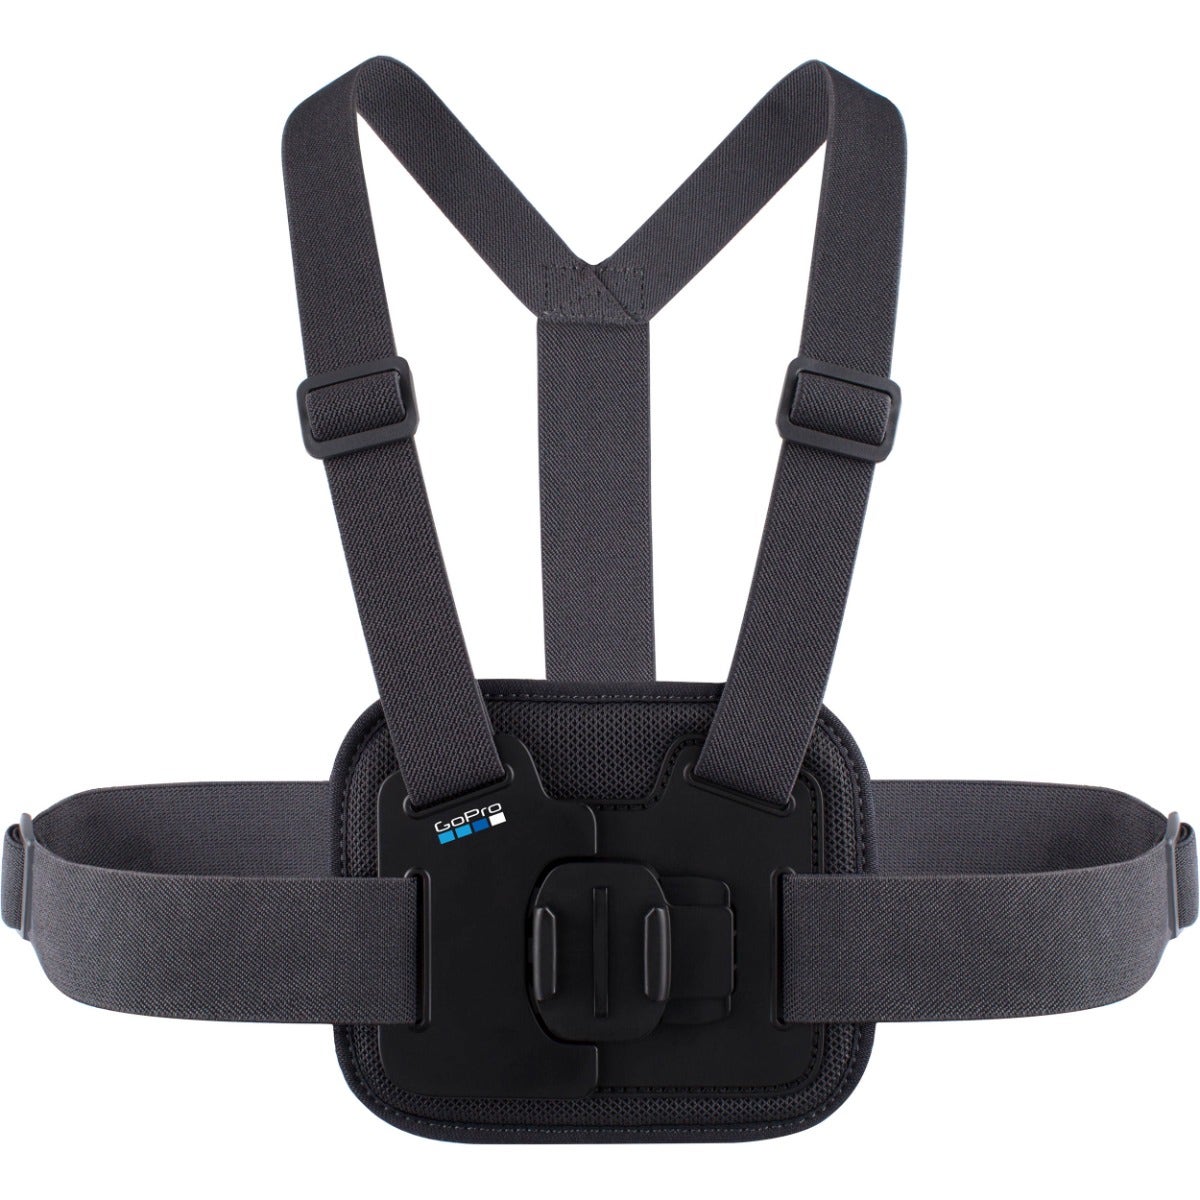 Image of GoPro Chesty (Performance Chest Mount)